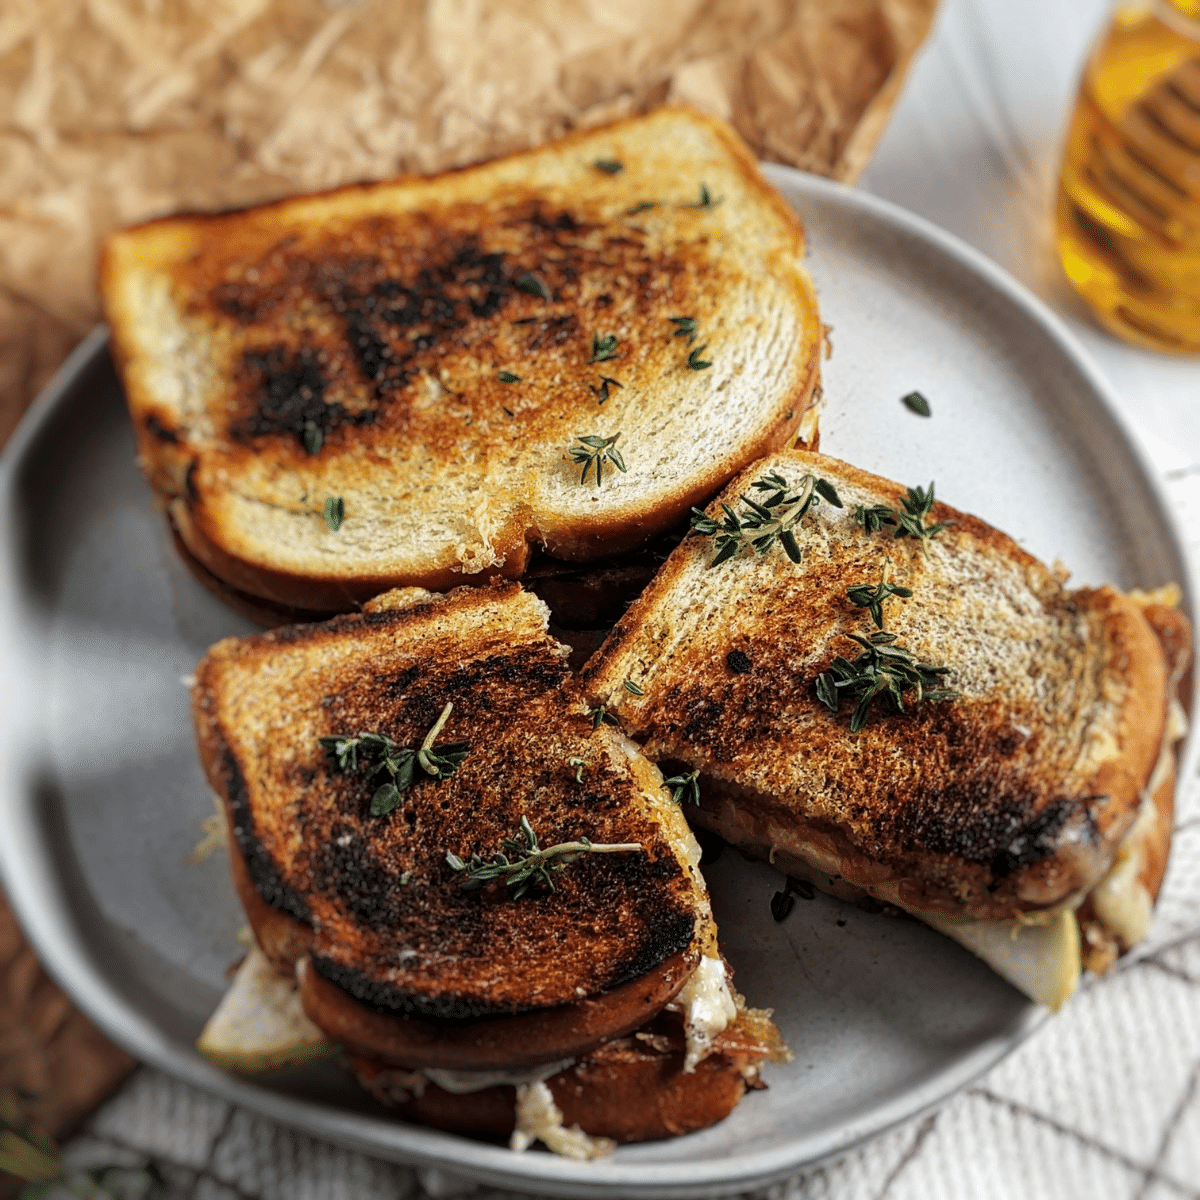 apple onion jam grilled cheese cut in half sprinkled with fresh thyme. recipe found on mandyolive.com